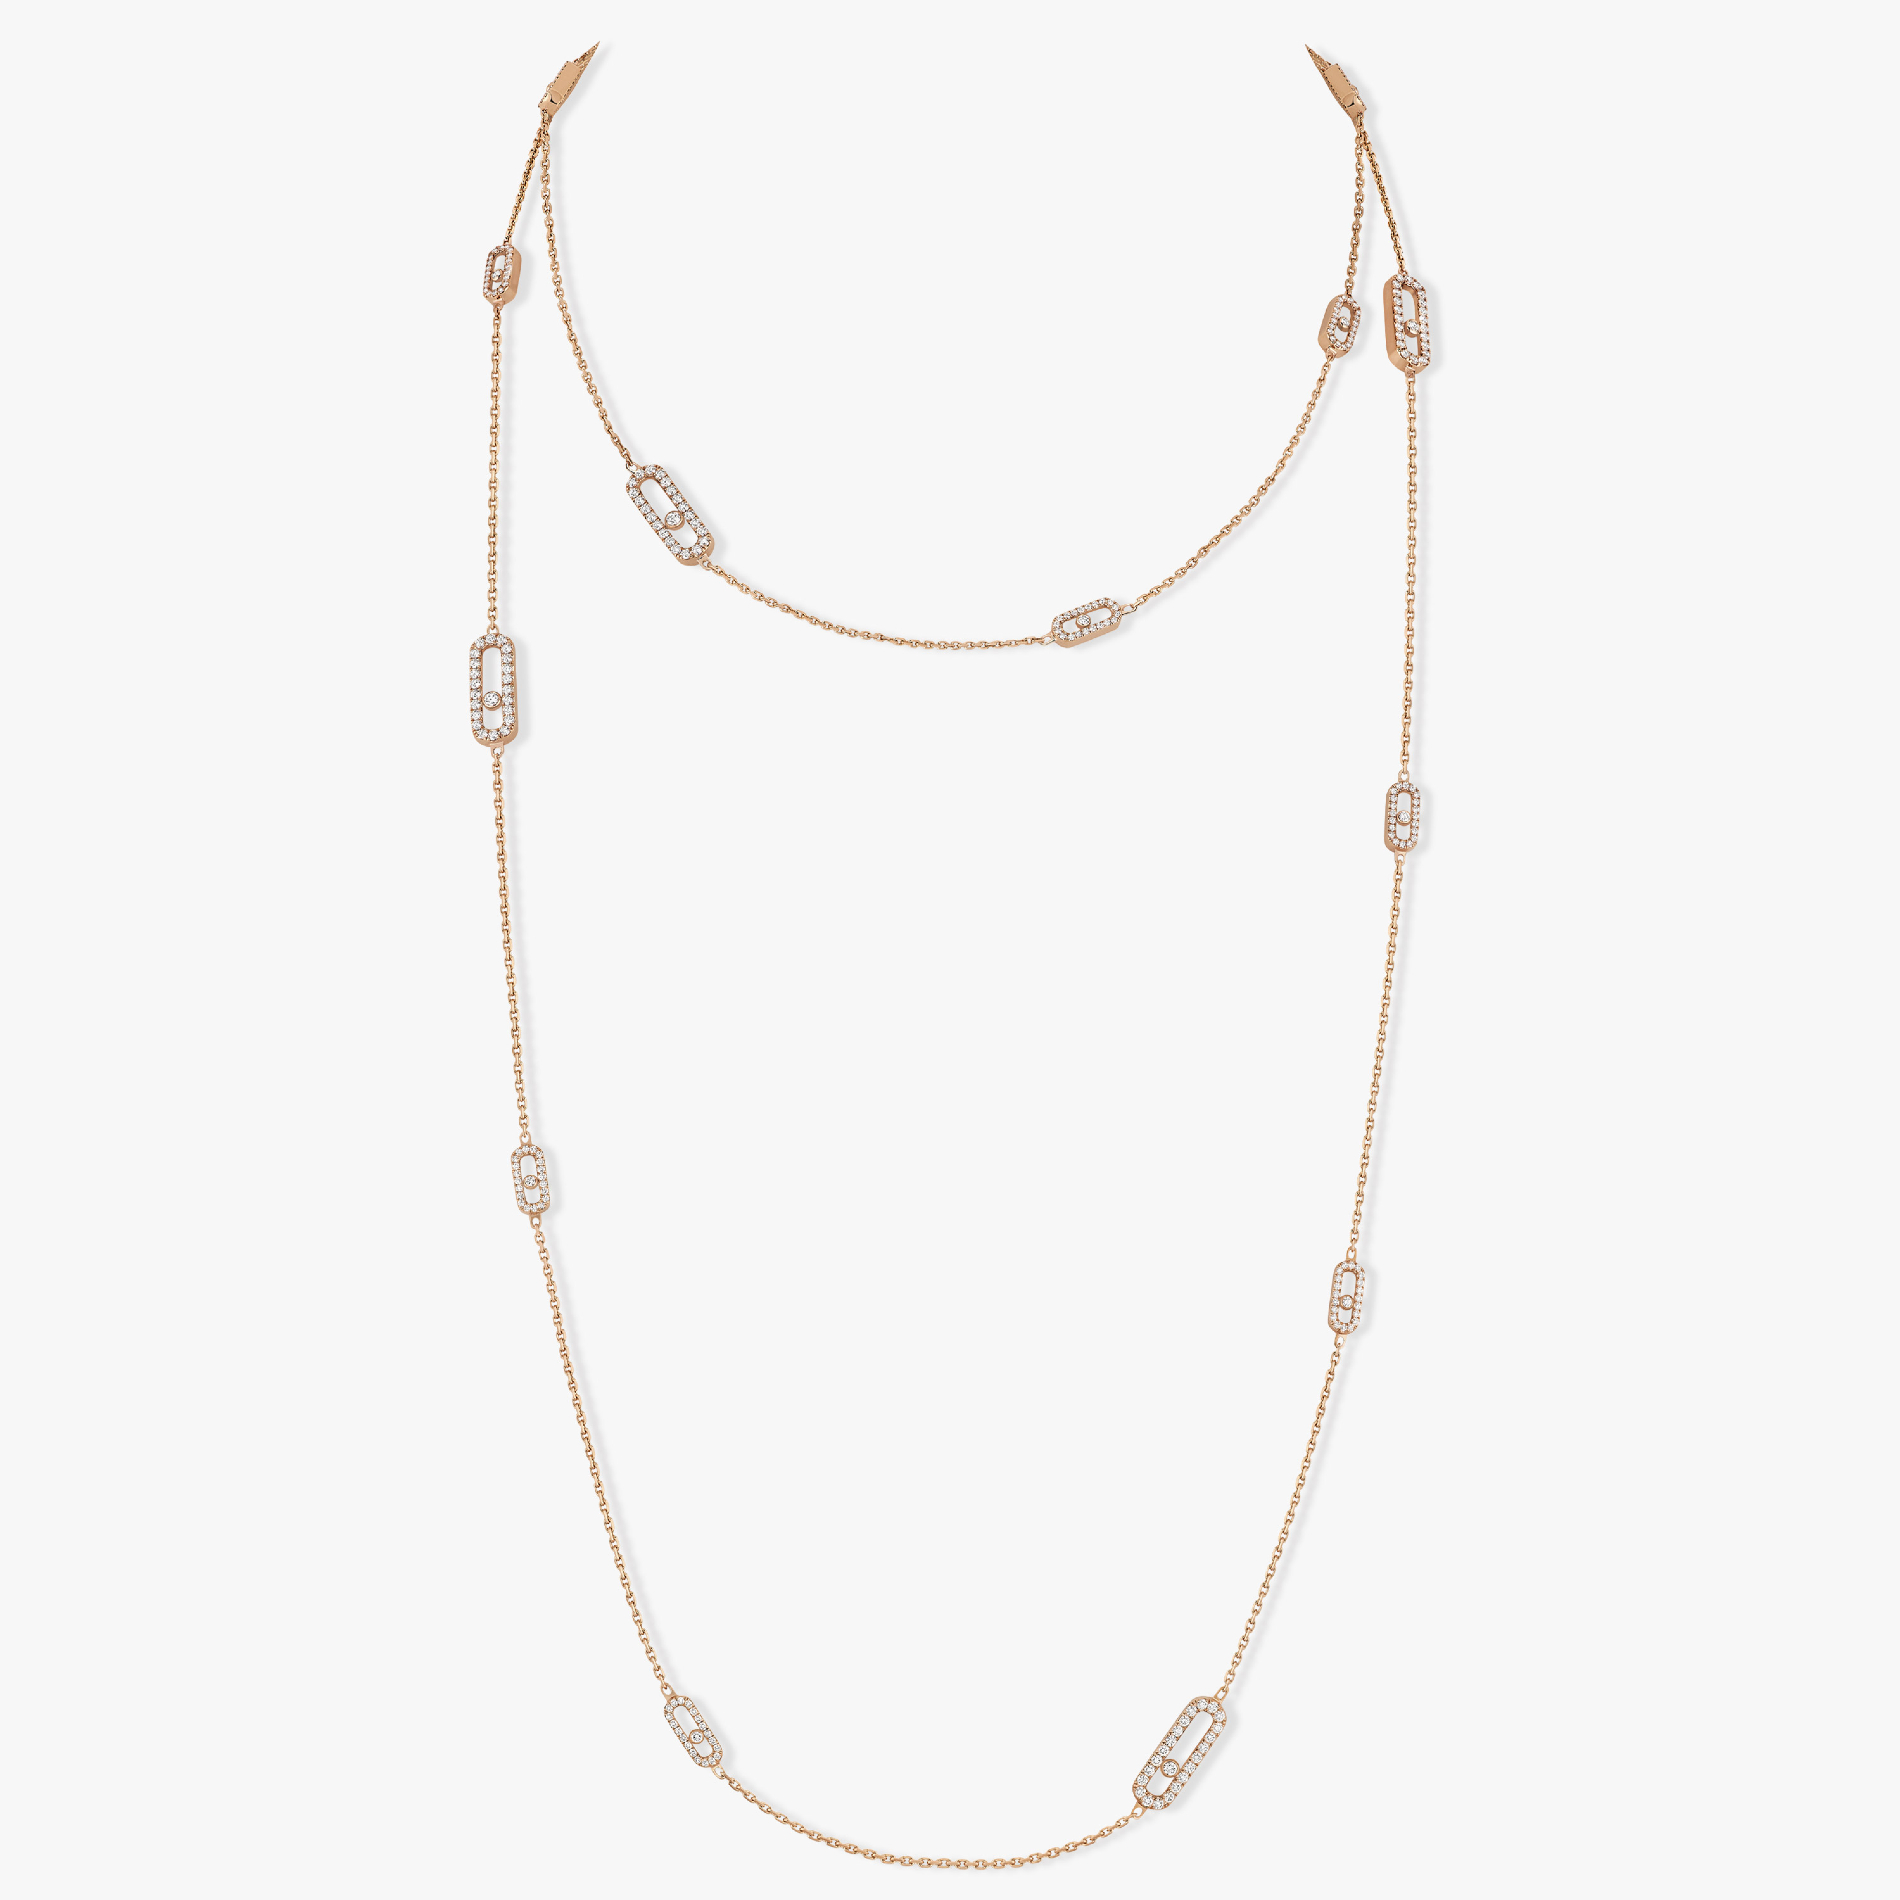 Move Uno Long Necklace Pink Gold For Her Diamond Necklace 11324-PG